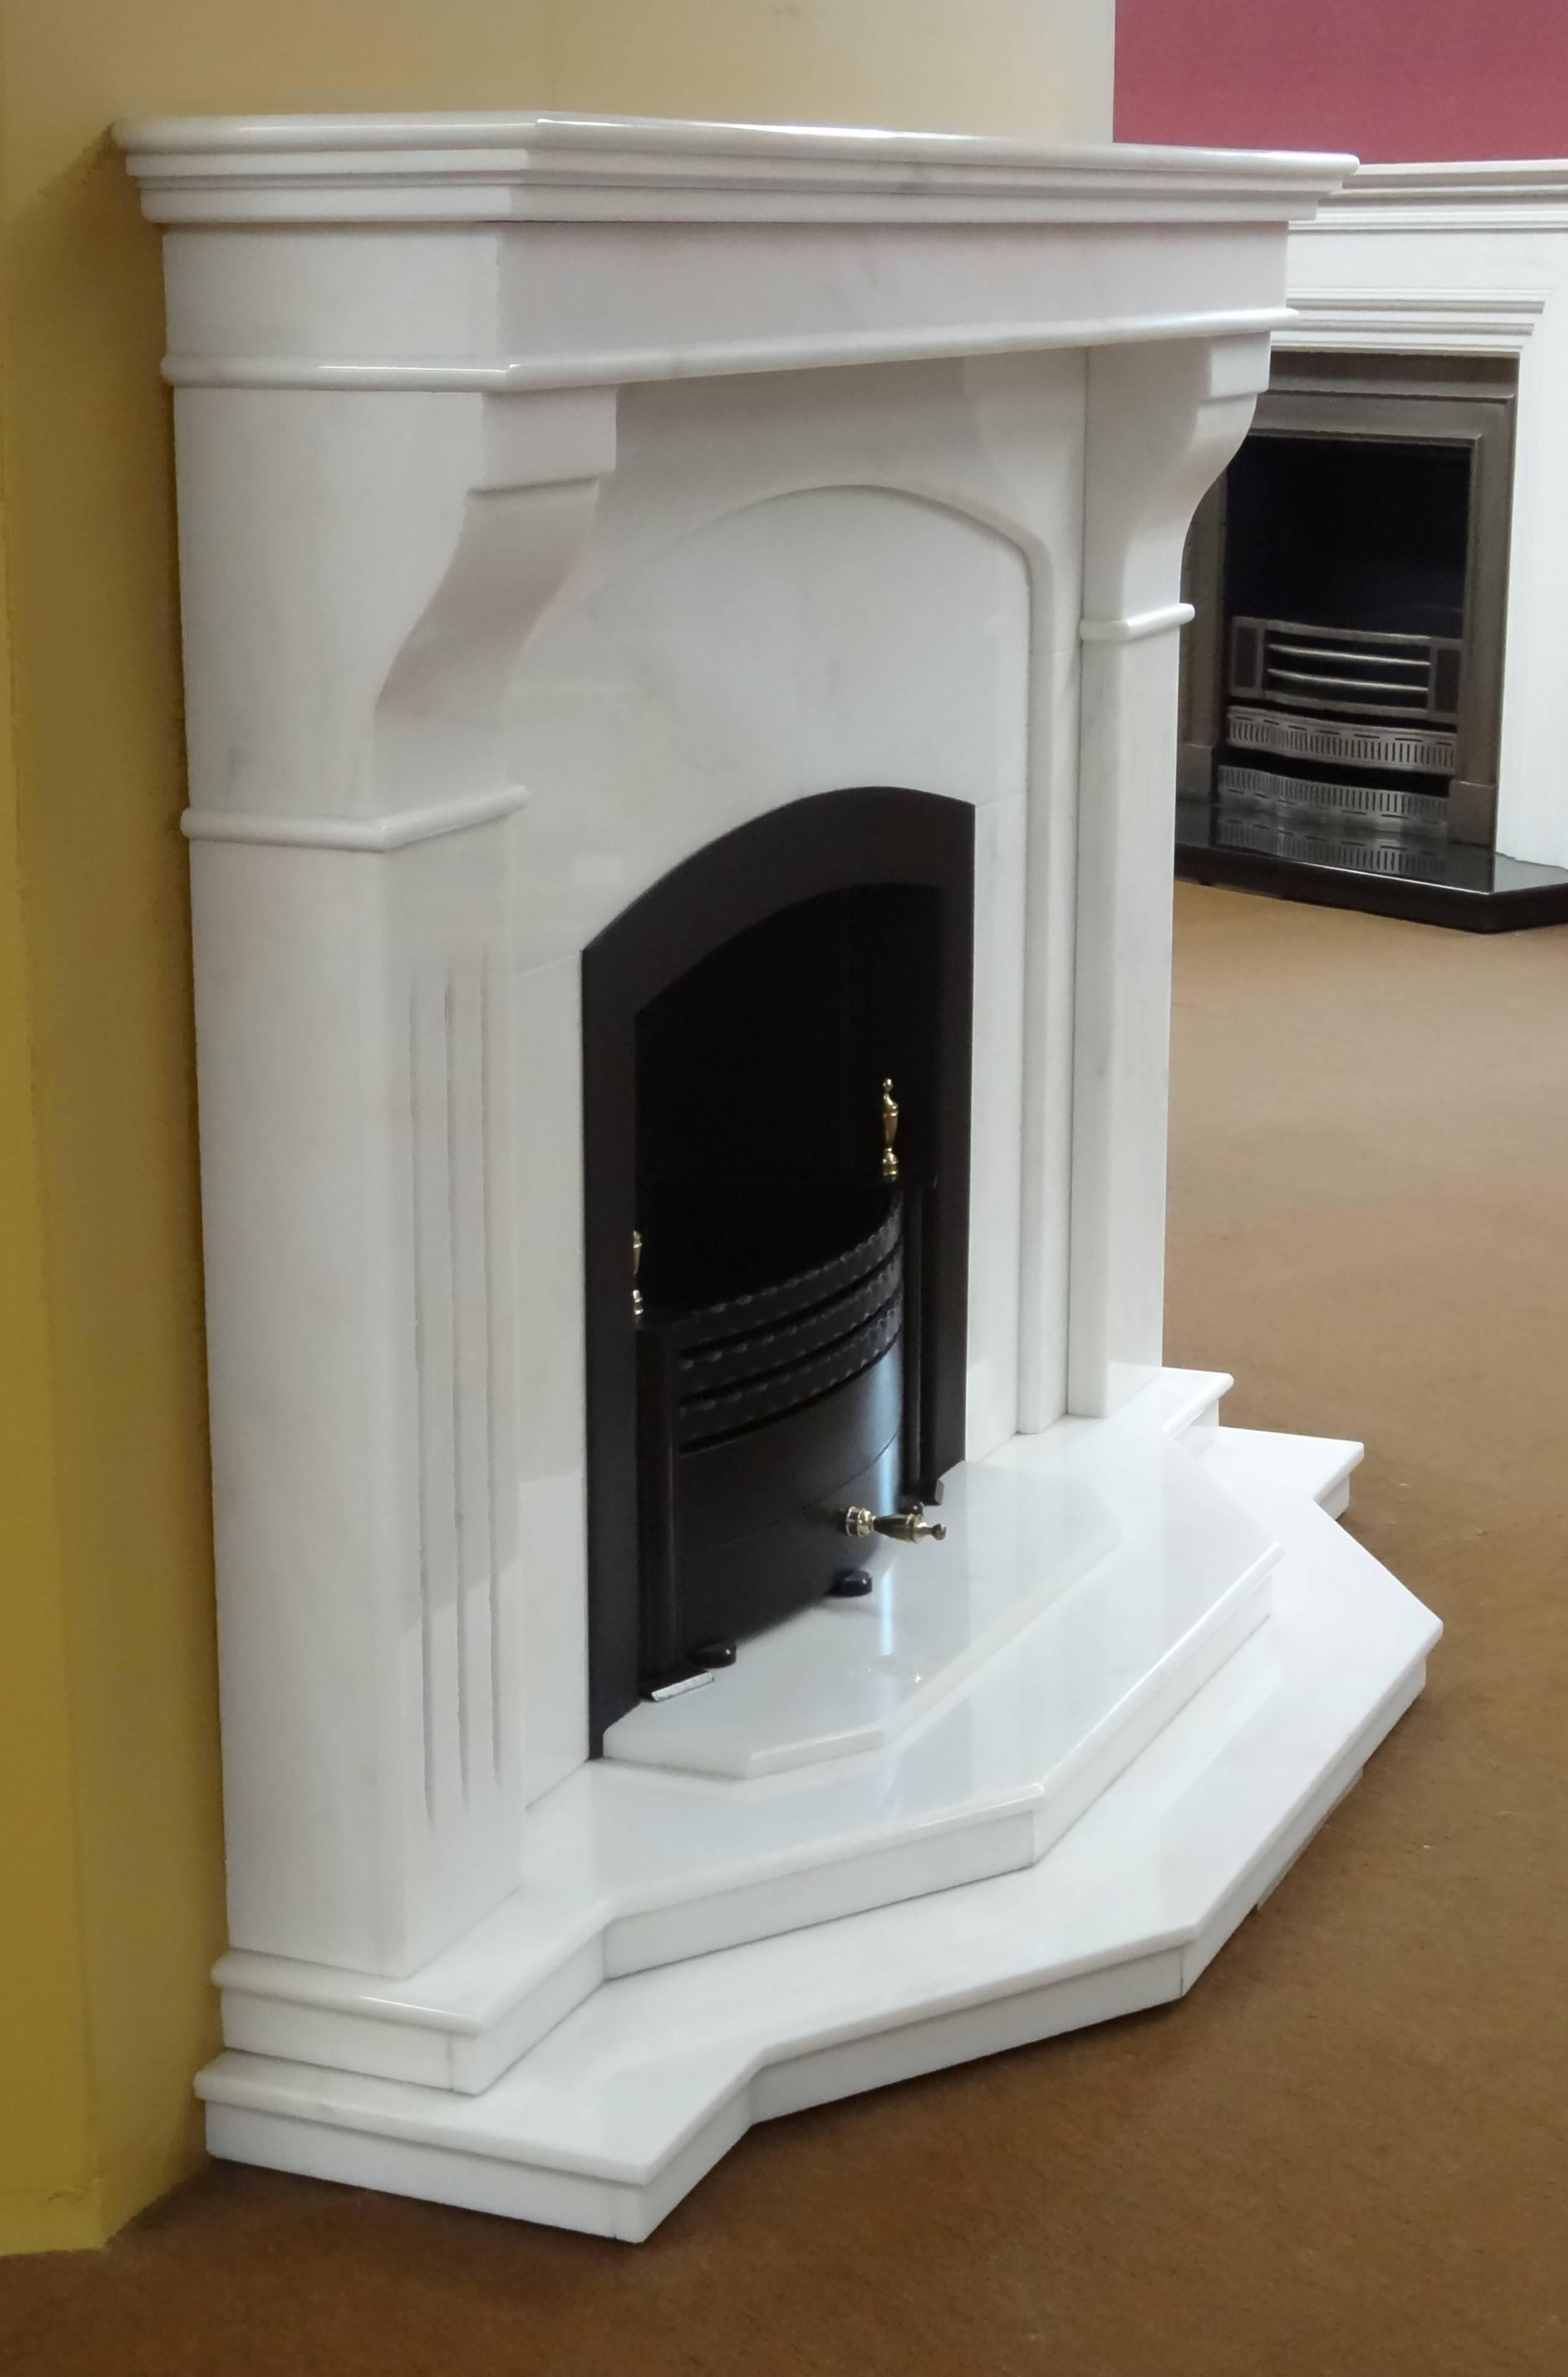 Great Britain (UK) 21st Century Contemporary Carved Marble Fireplace with Metal Trim and Fire Grate For Sale